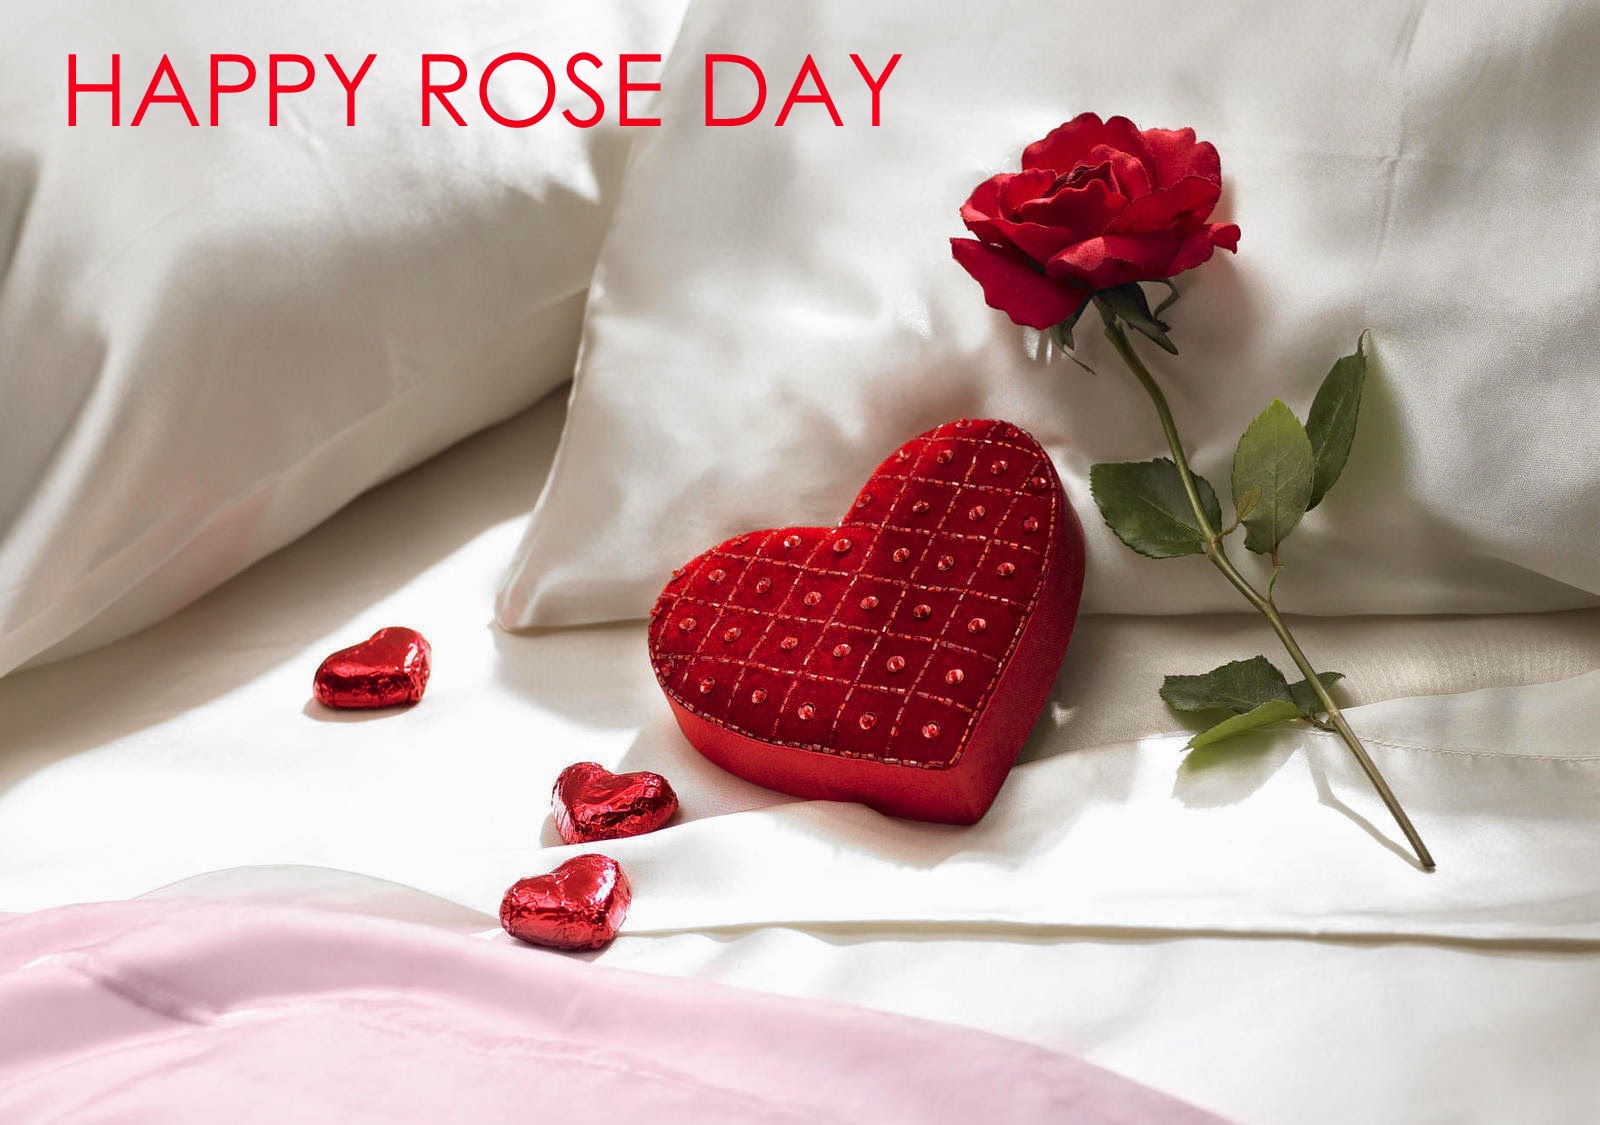 Happy Rose Day Quotes - Happy Rose Day My Love - 1600x1125 Wallpaper -  